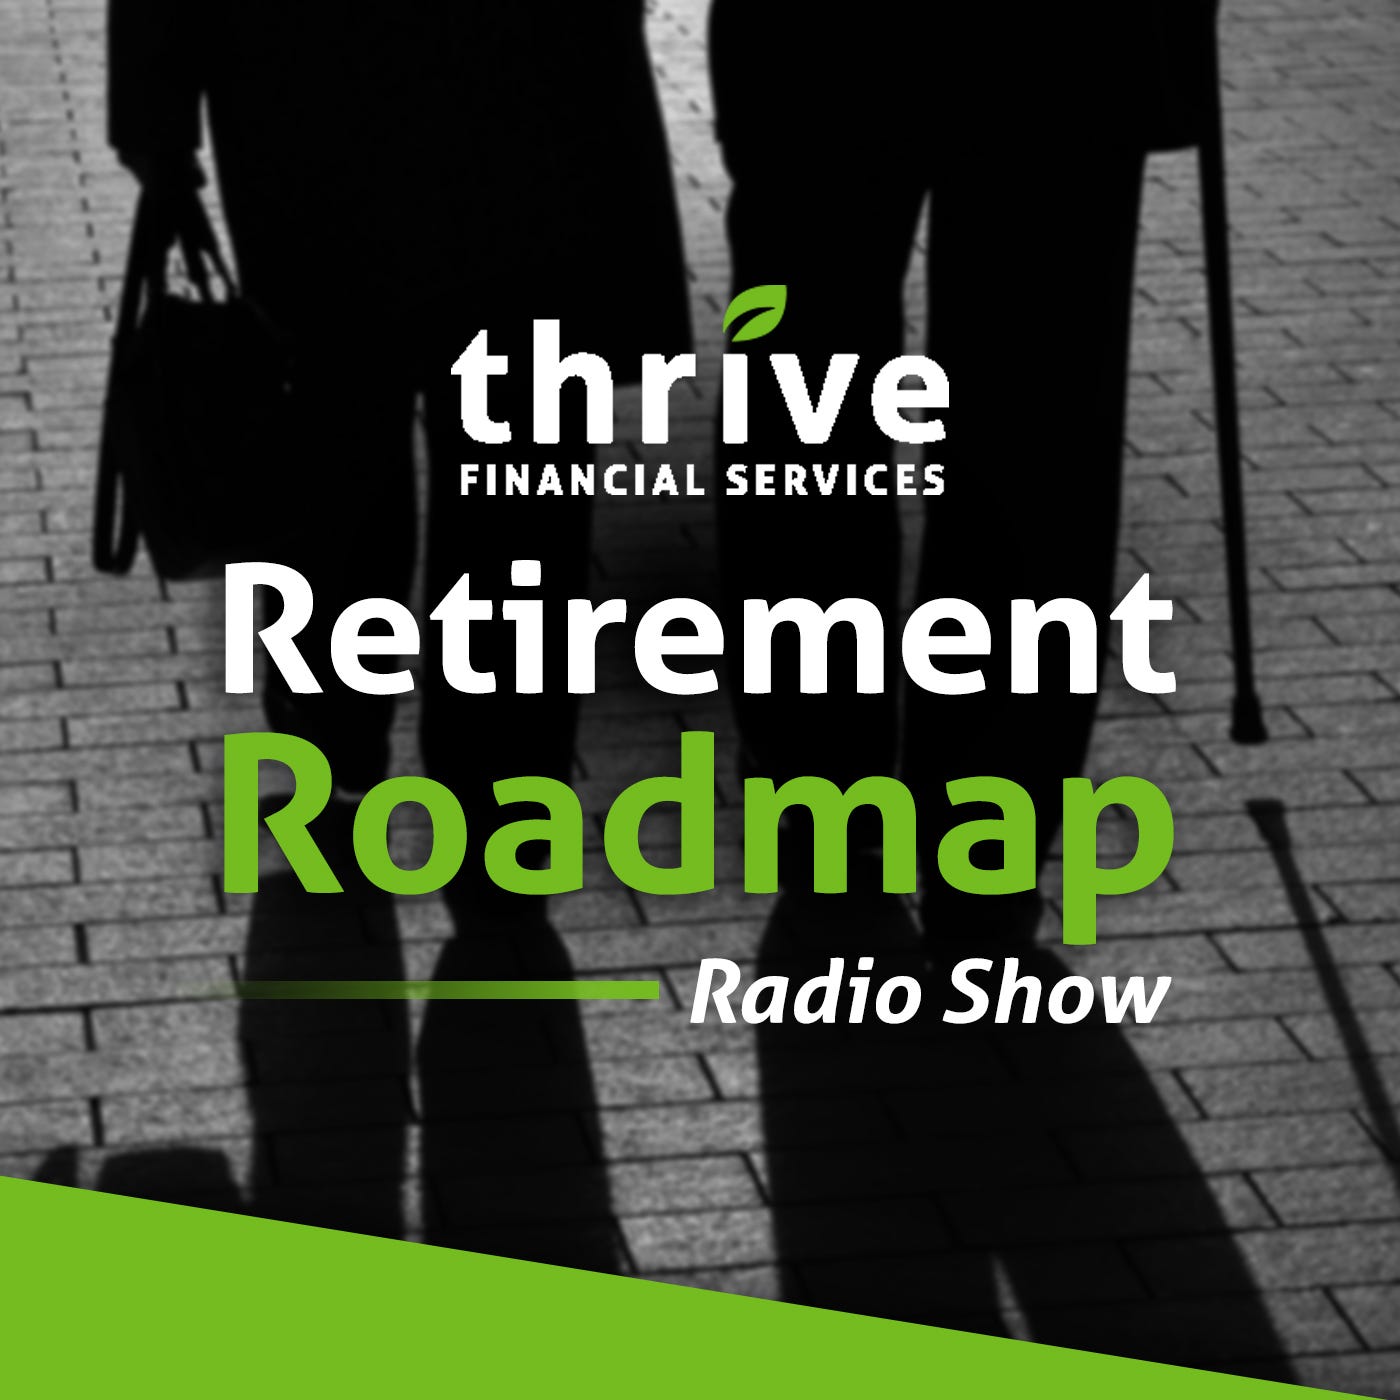 September 28, 2019 |Thrive Financial Services